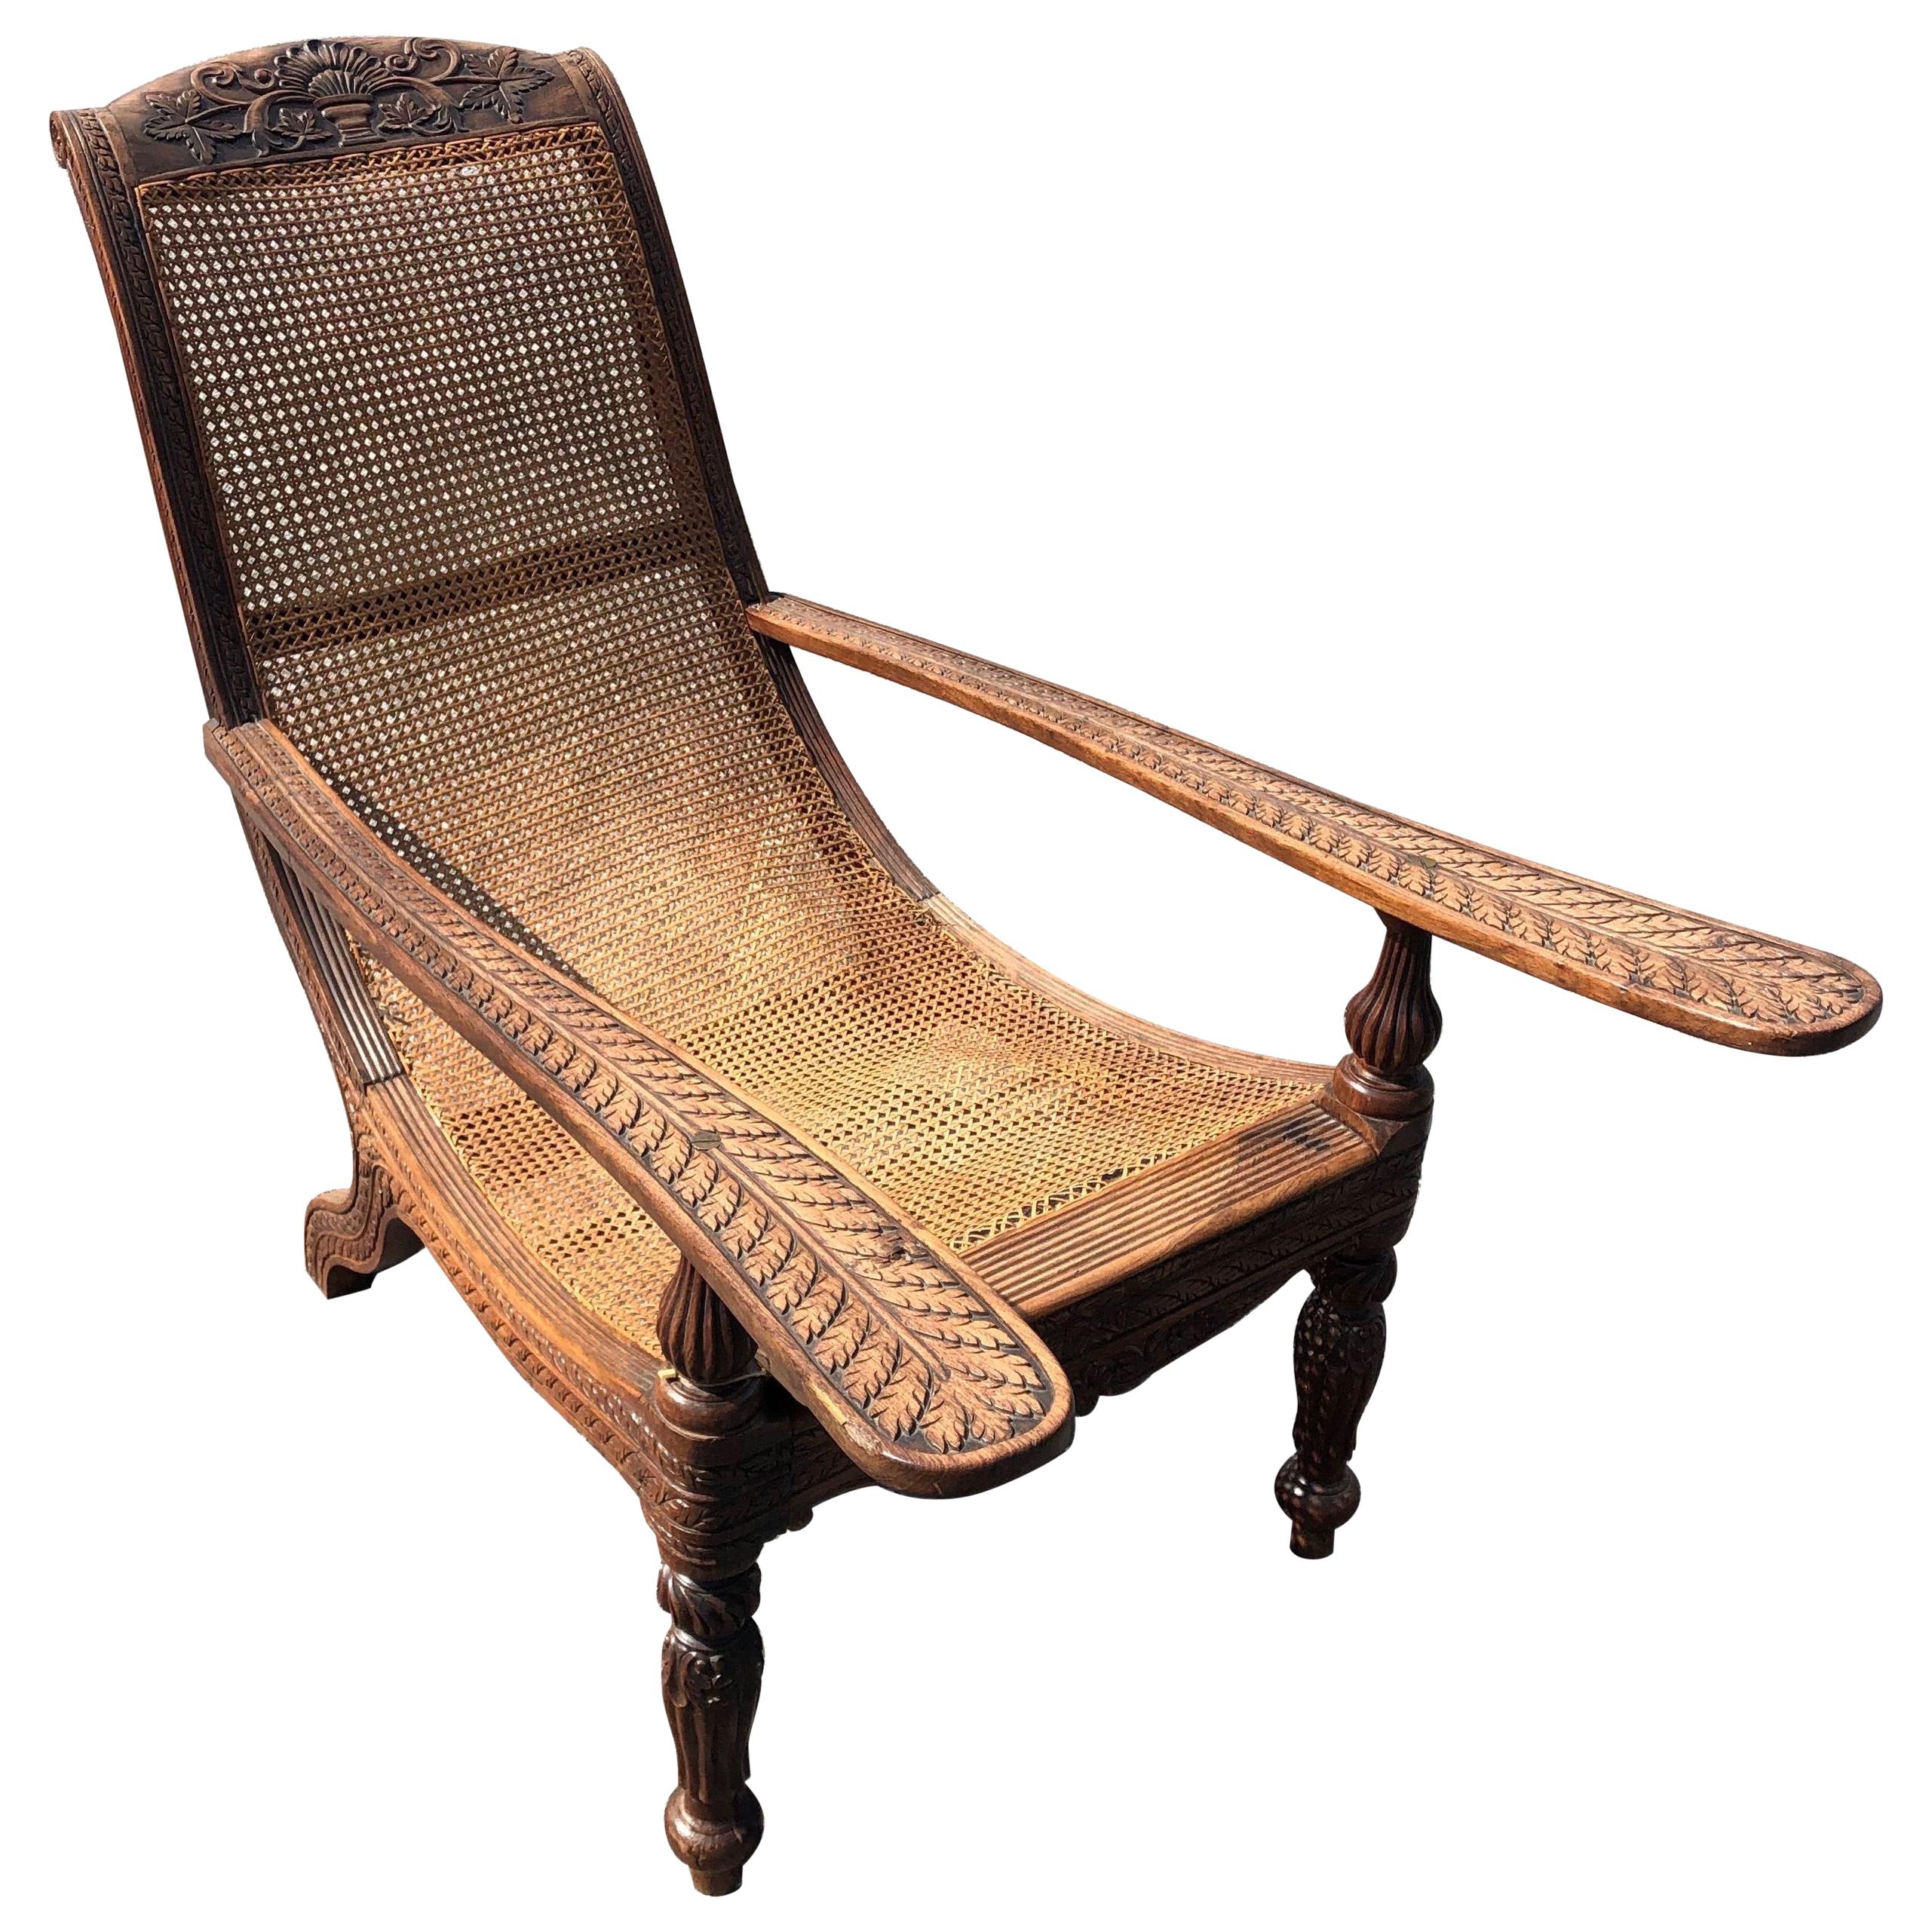 Carved 19th Century West Indies Rosewood Plantation Chair